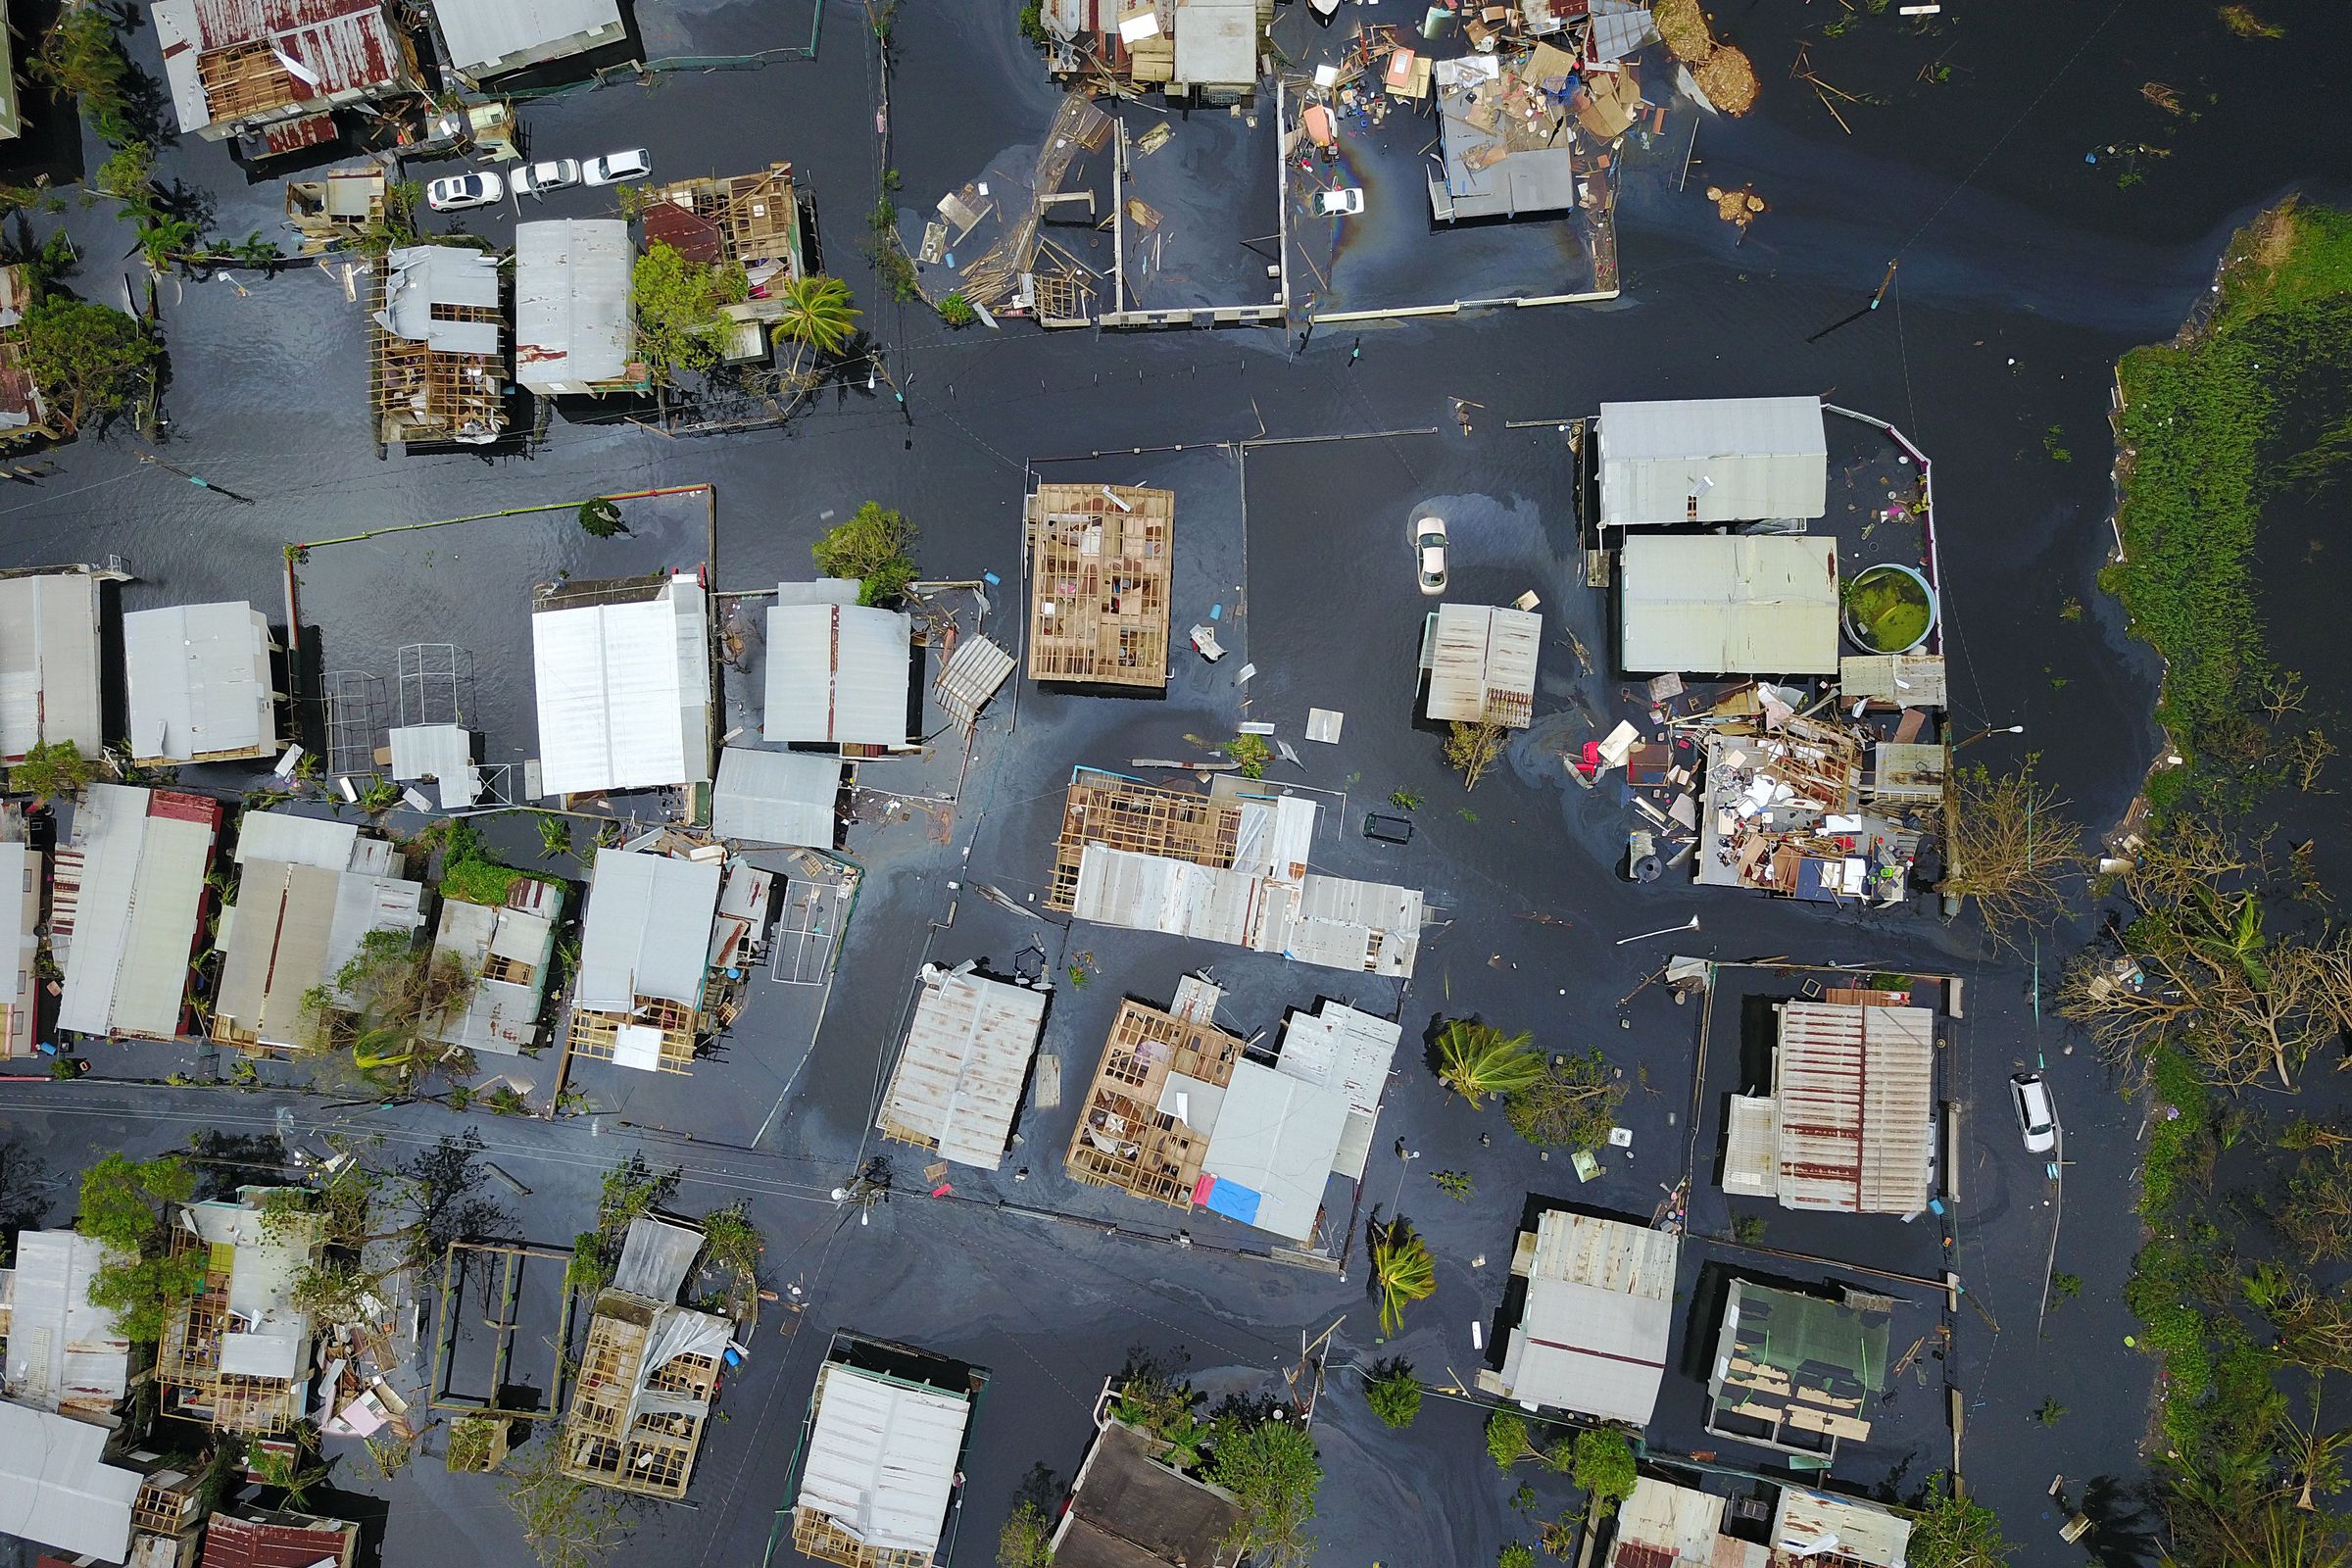 An aerial view shows the rooftops of homes and buildings in a flooded area.